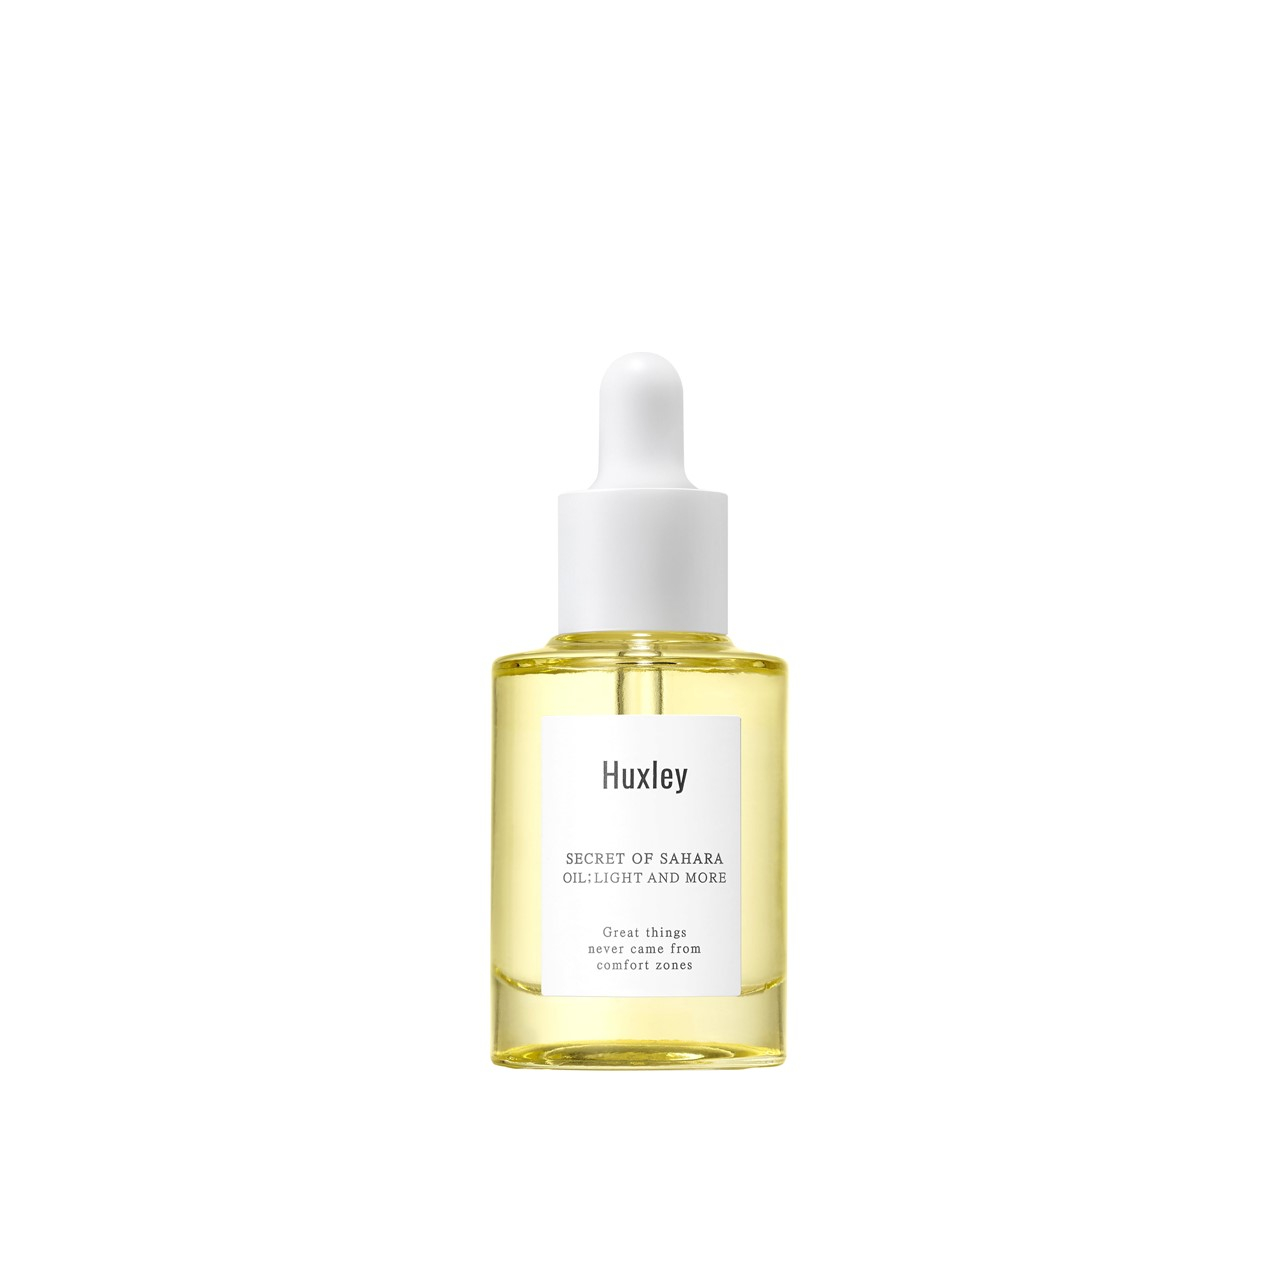 Huxley Oil Light and More 30ml